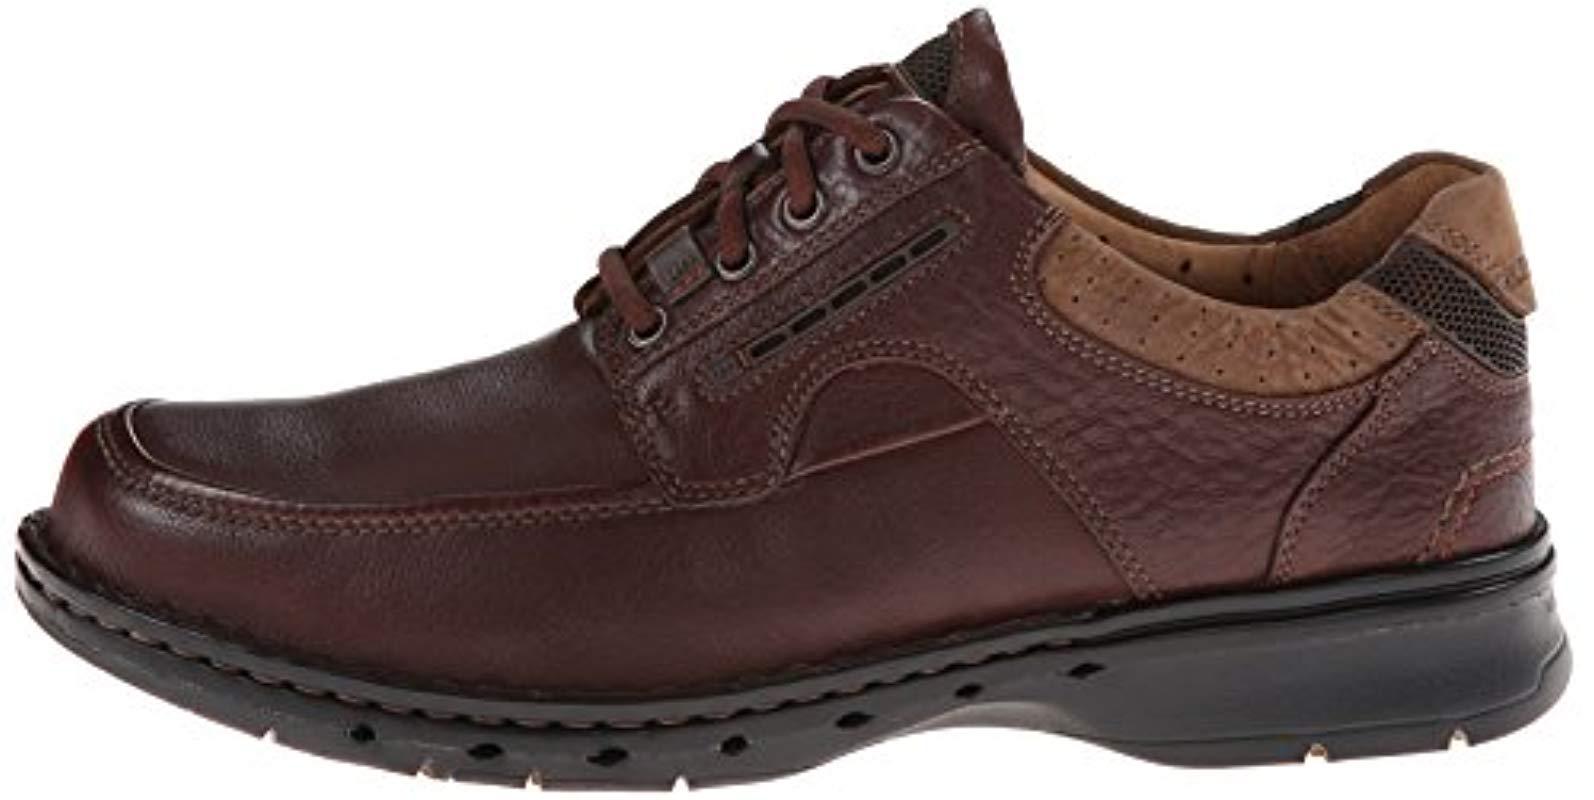 Clarks Unstructured Un.bend Casual Oxford,brown,8.5 Xw Us for Men ...